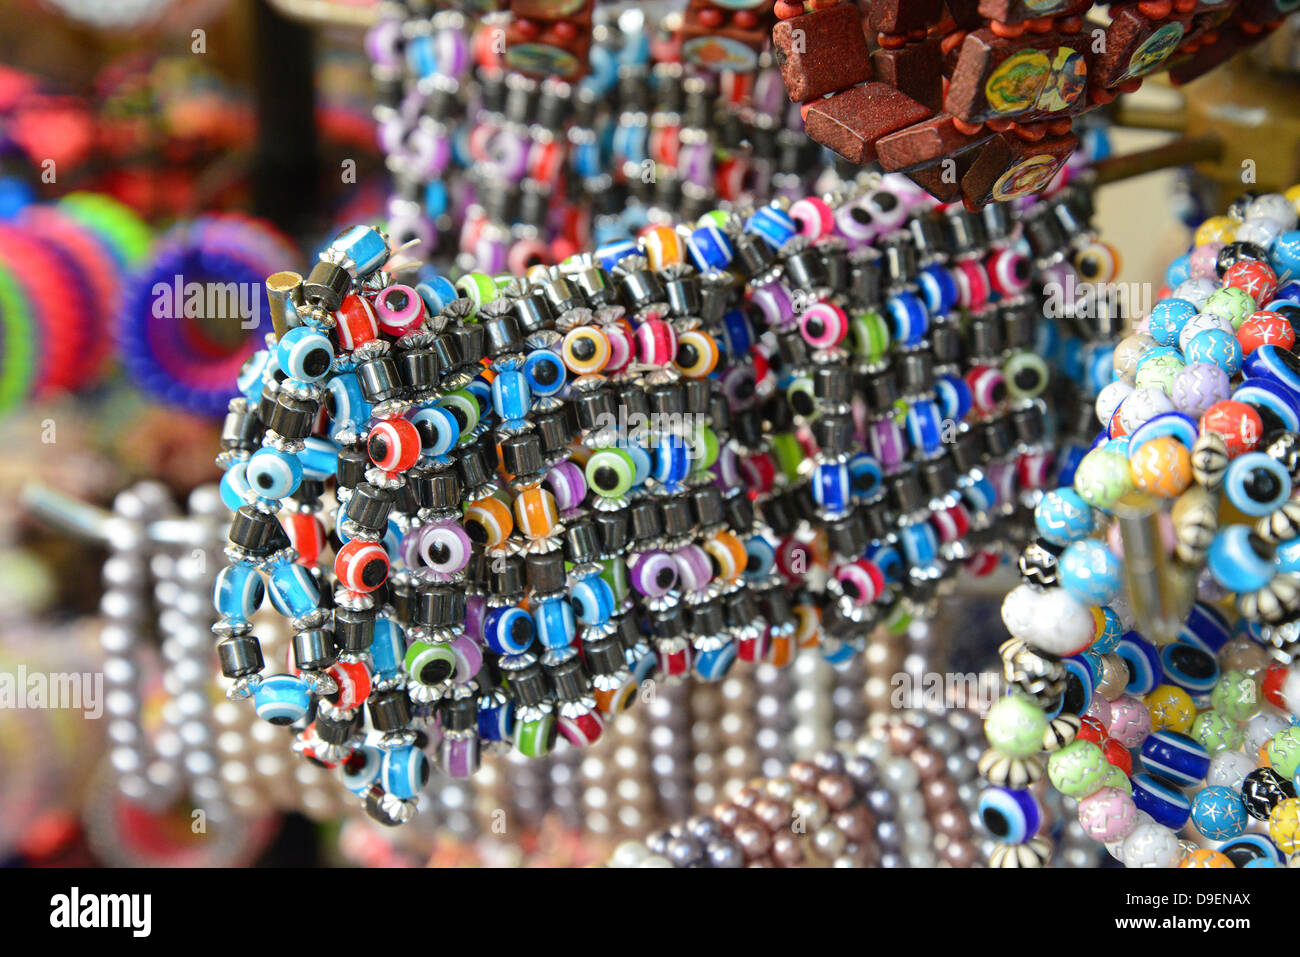 Greek 'evil eye' jewellery souvenirs, Old Town, City of Rhodes, Rhodes (Rodos), The Dodecanese, South Aegean Region, Greece Stock Photo